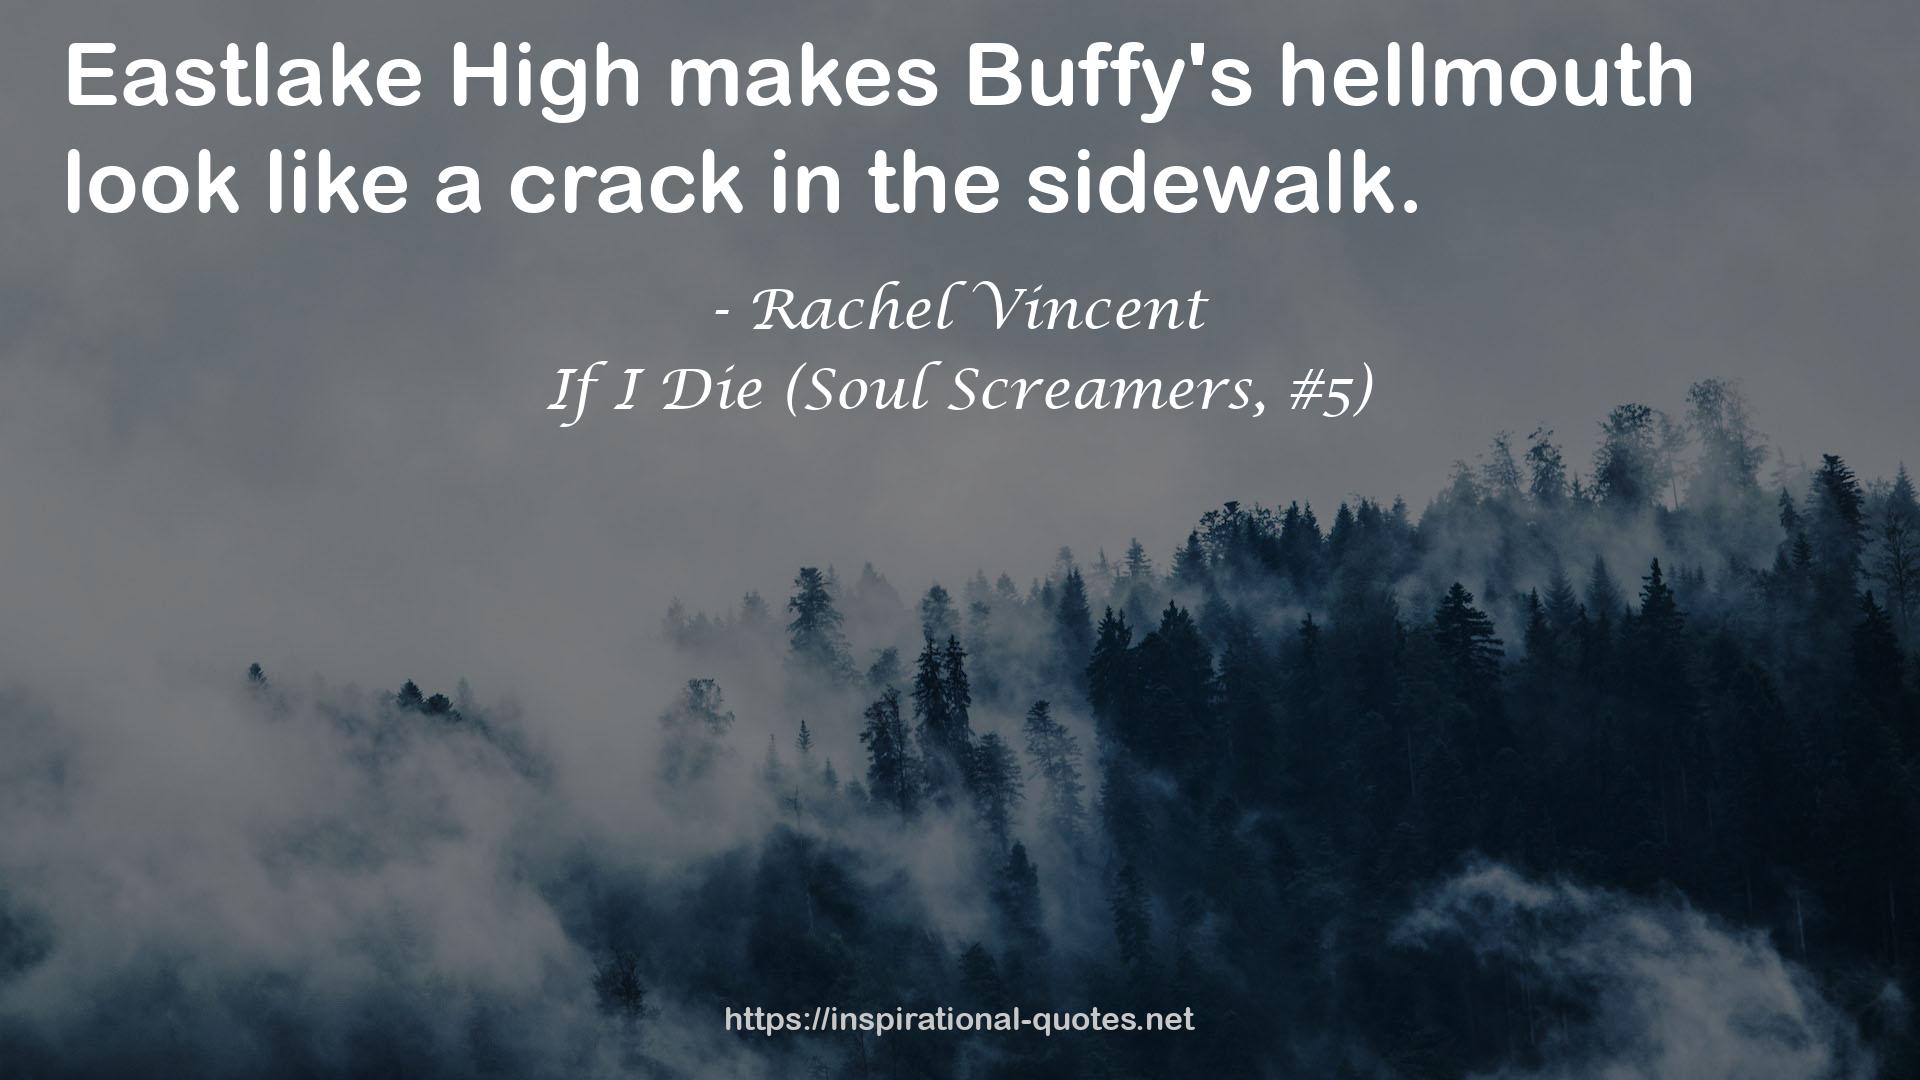 If I Die (Soul Screamers, #5) QUOTES